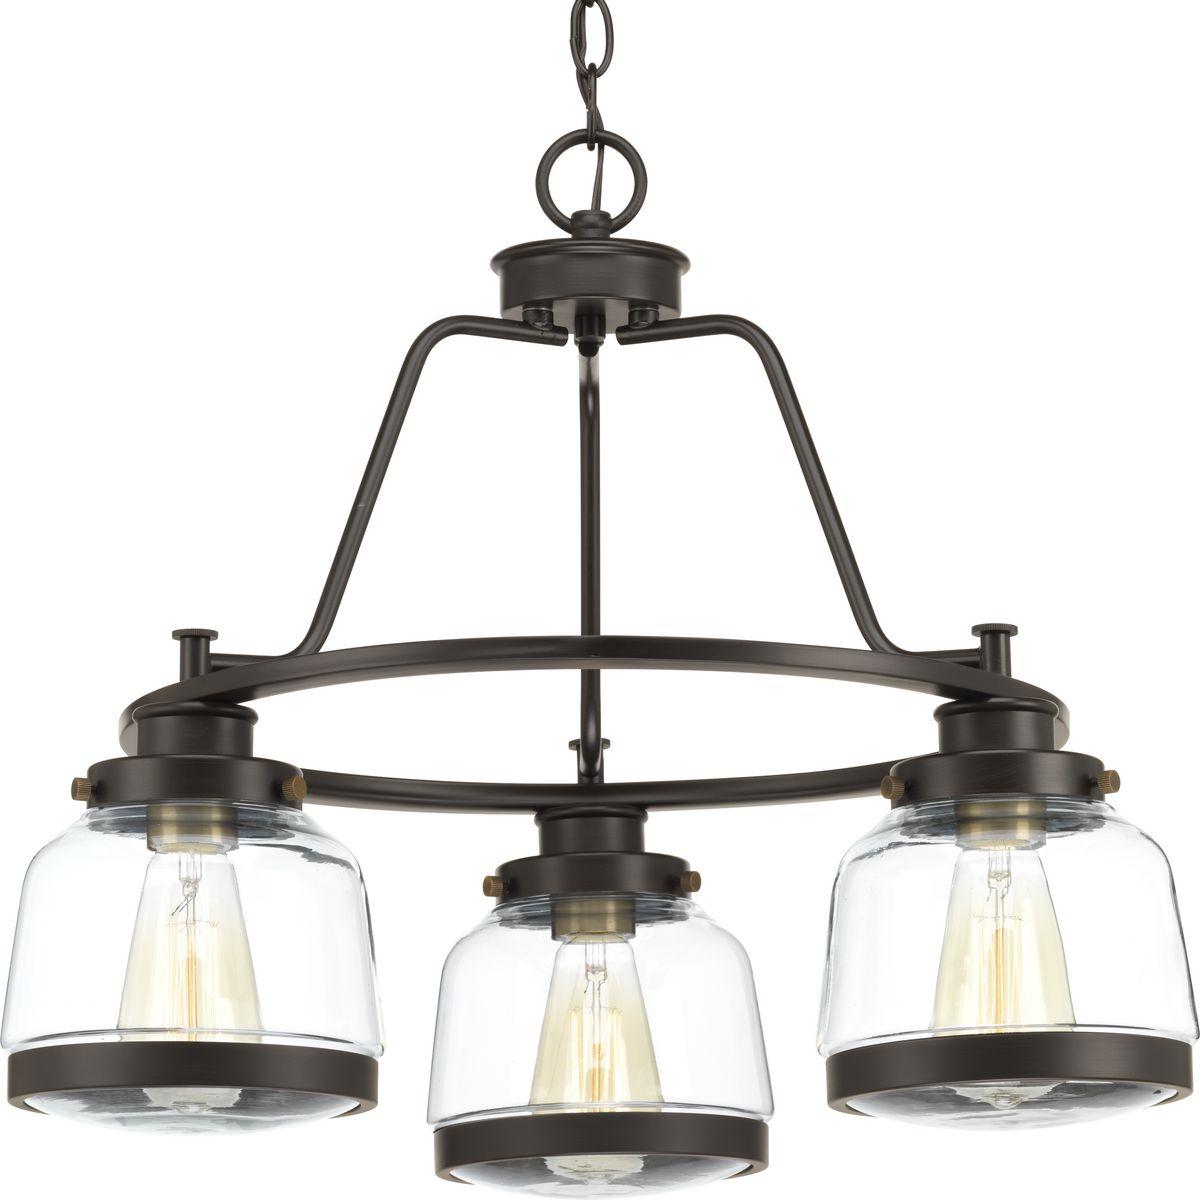 Hubbell P400057-020 The Judson collection features a timeless clear schoolhouse-style globe. Metal fittings add distinction to complete the vintage look. Judson provides the perfect compliment to farmhouse or coastal-inspired homes. Three-light chandelier in an Antique Bronz